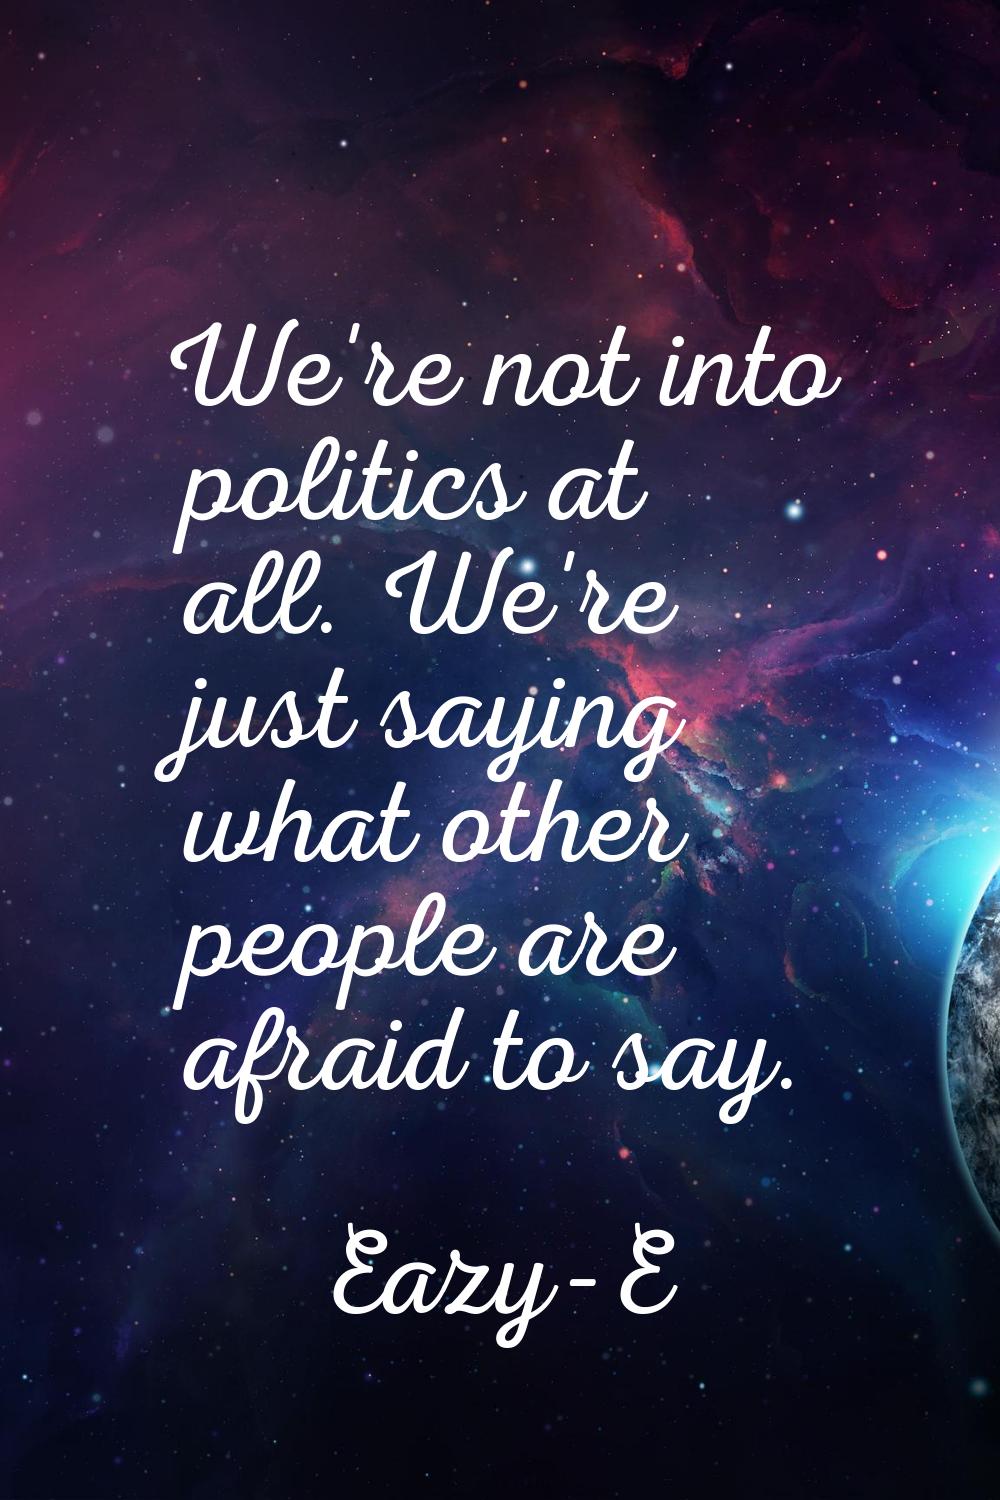 We're not into politics at all. We're just saying what other people are afraid to say.